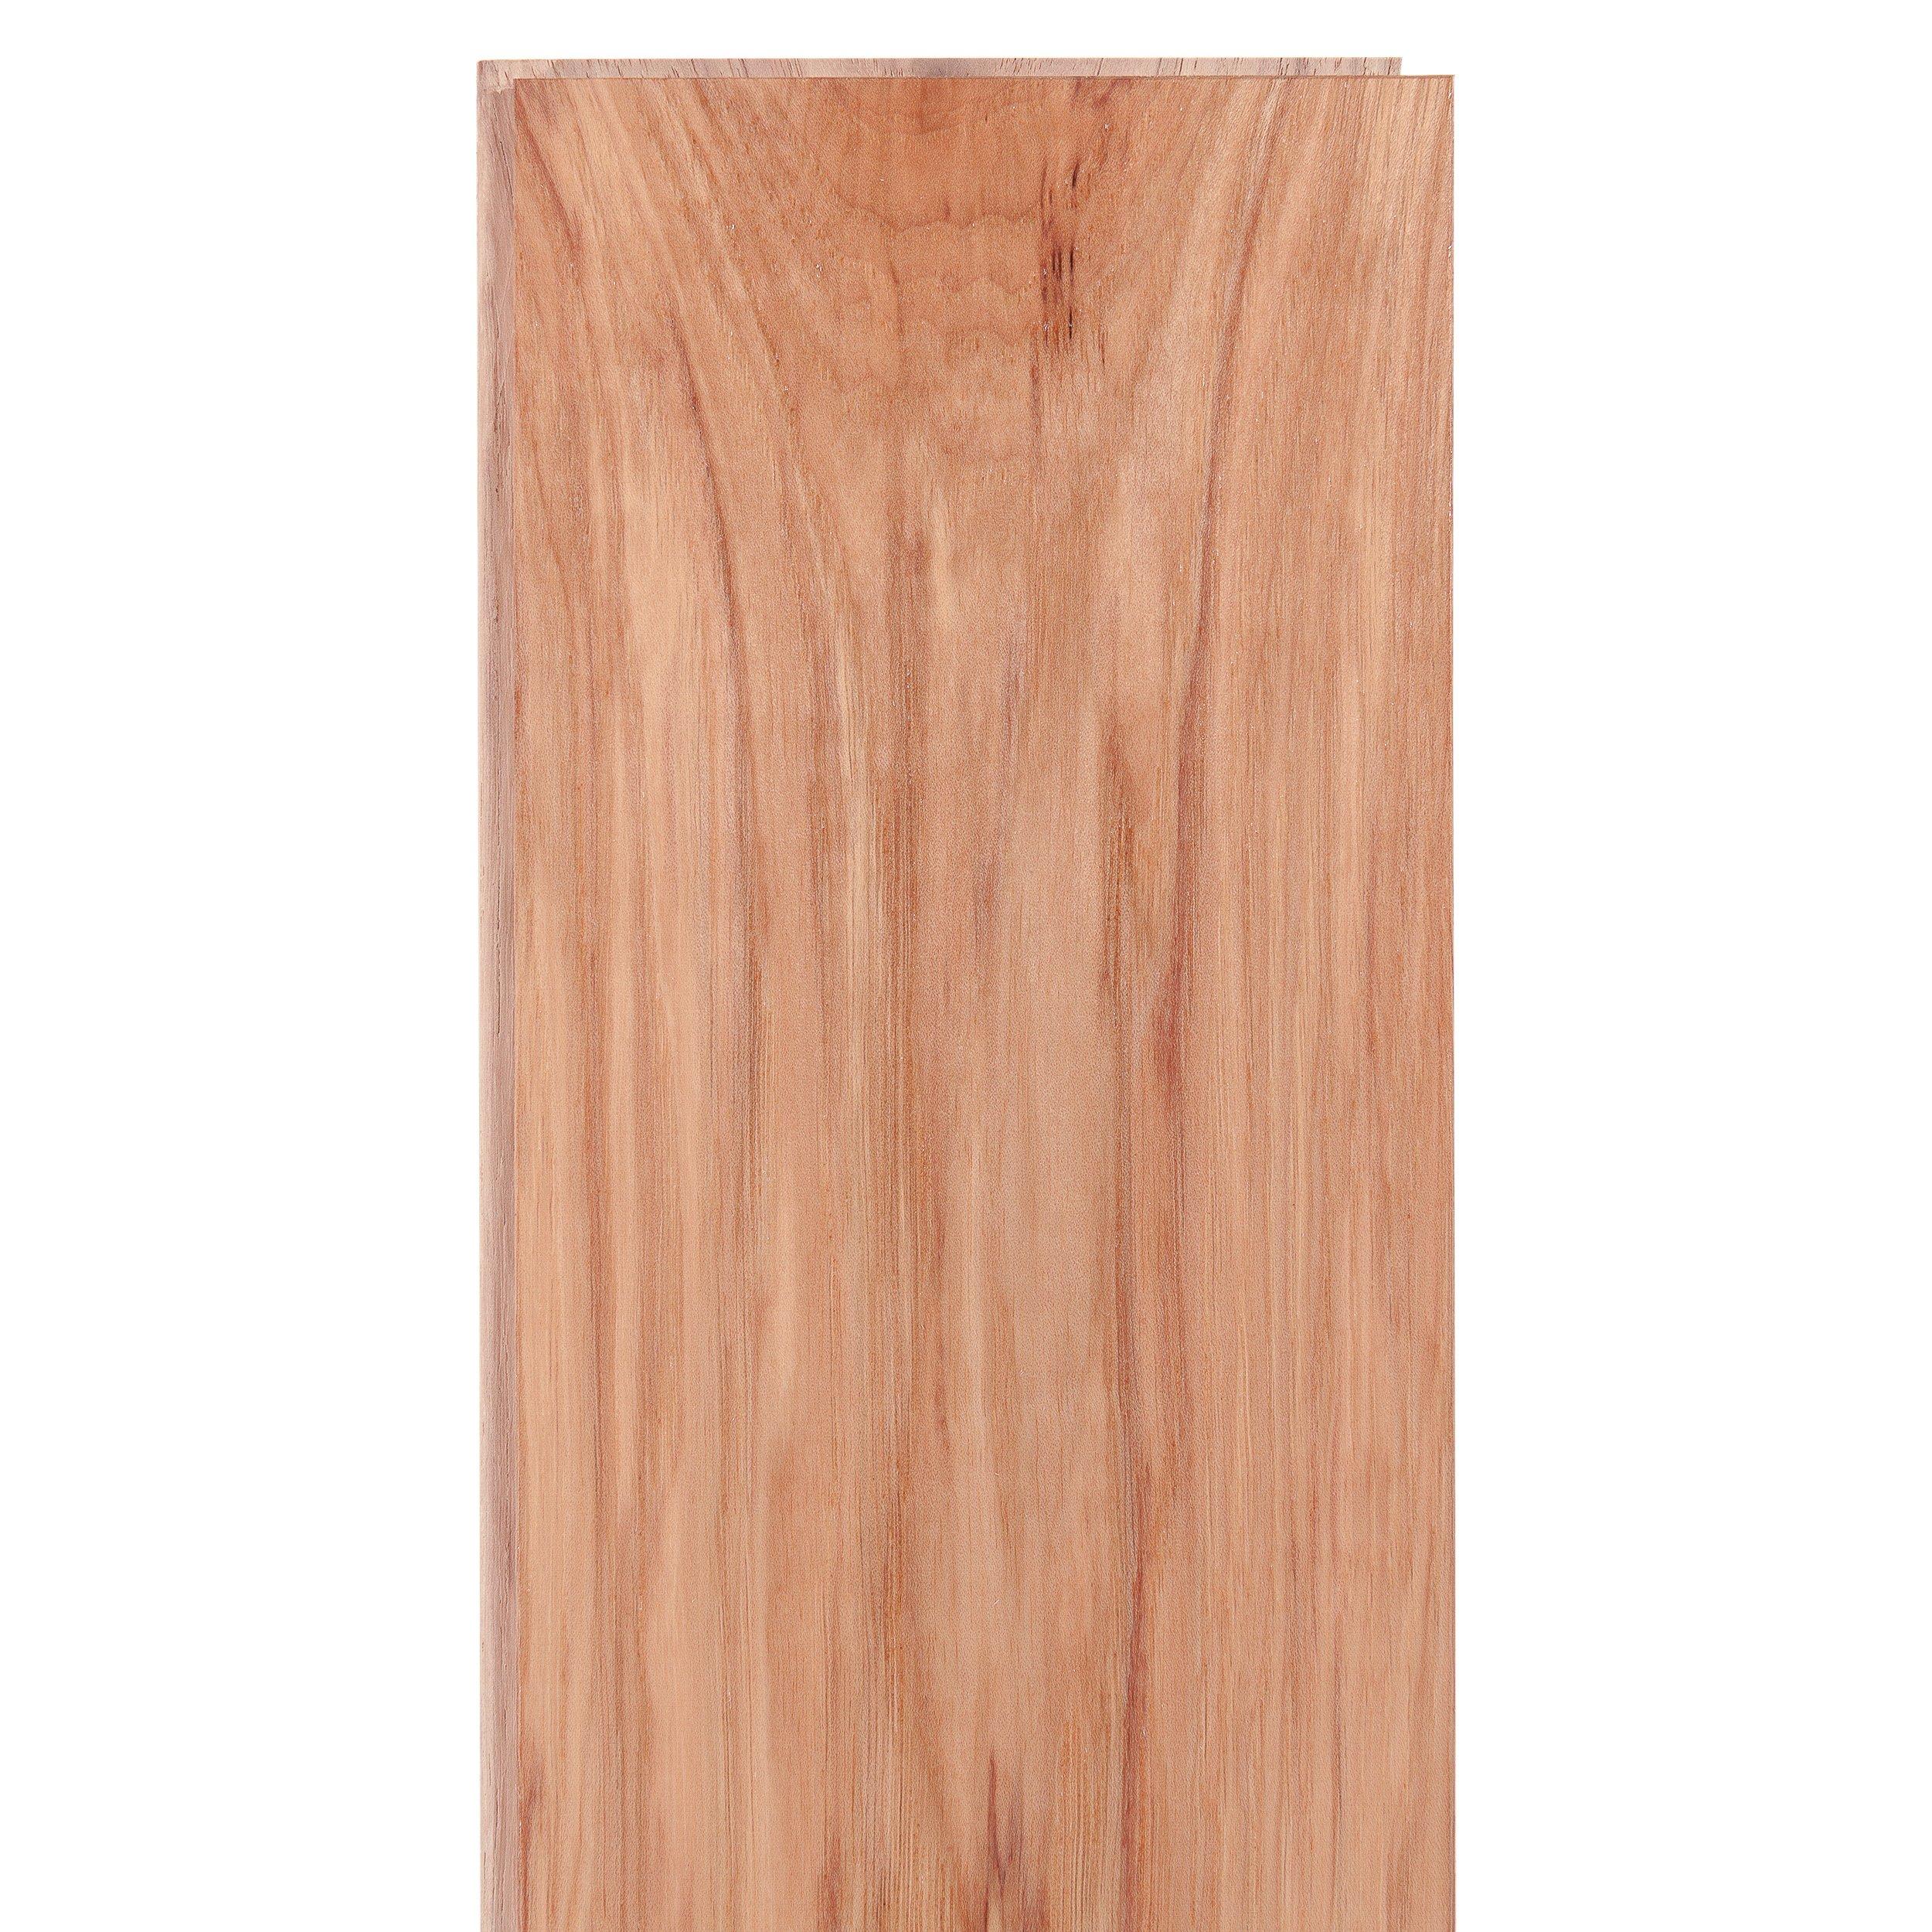 Natural Hickory Smooth Solid Hardwood